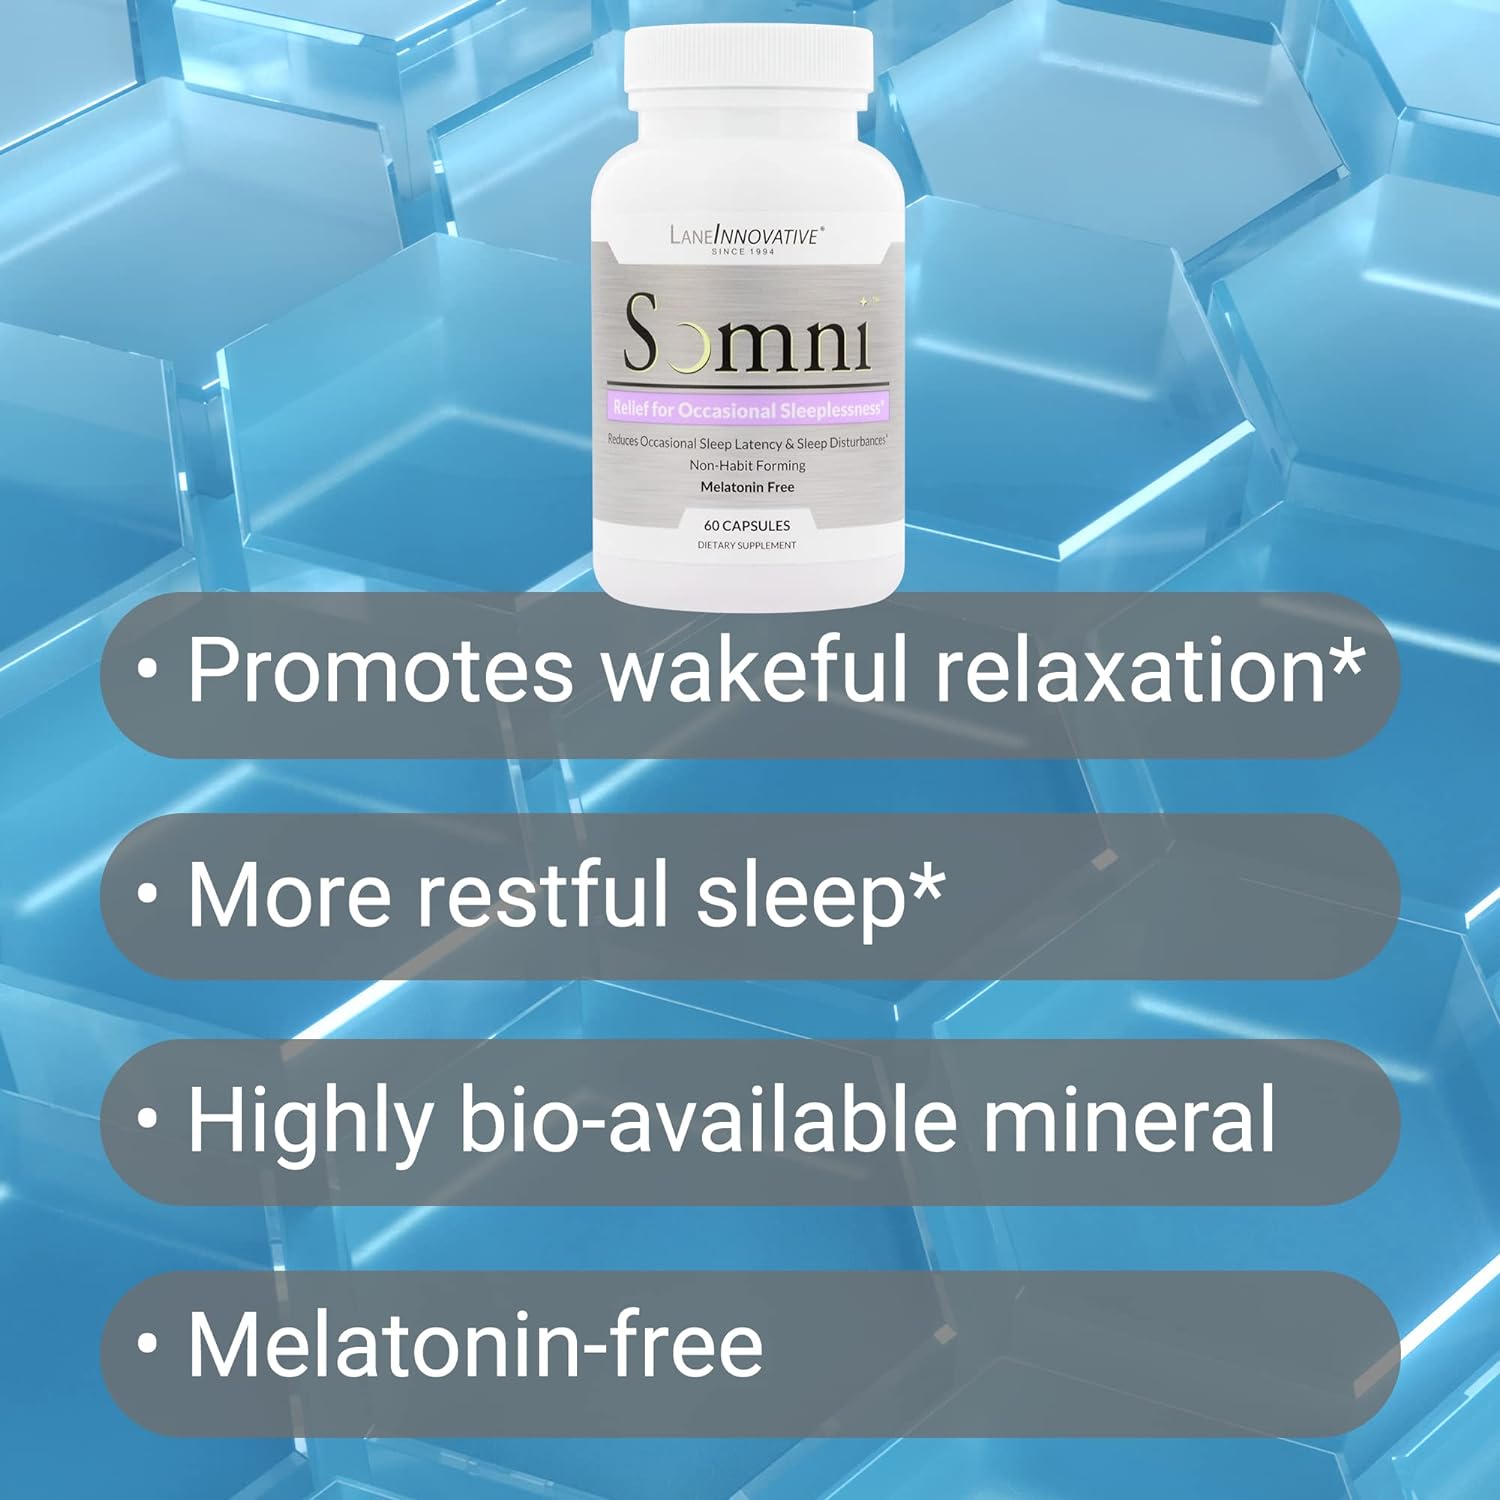 Lane Innovative - Somni, Sleep Aid Supplement, Promotes Relaxation & Balance, Helps Combat Occasional Stress, Rich in Essential Vitamins & Herbal Extracts, Supports More Restful Sleep (20 Servings) : Health & Household